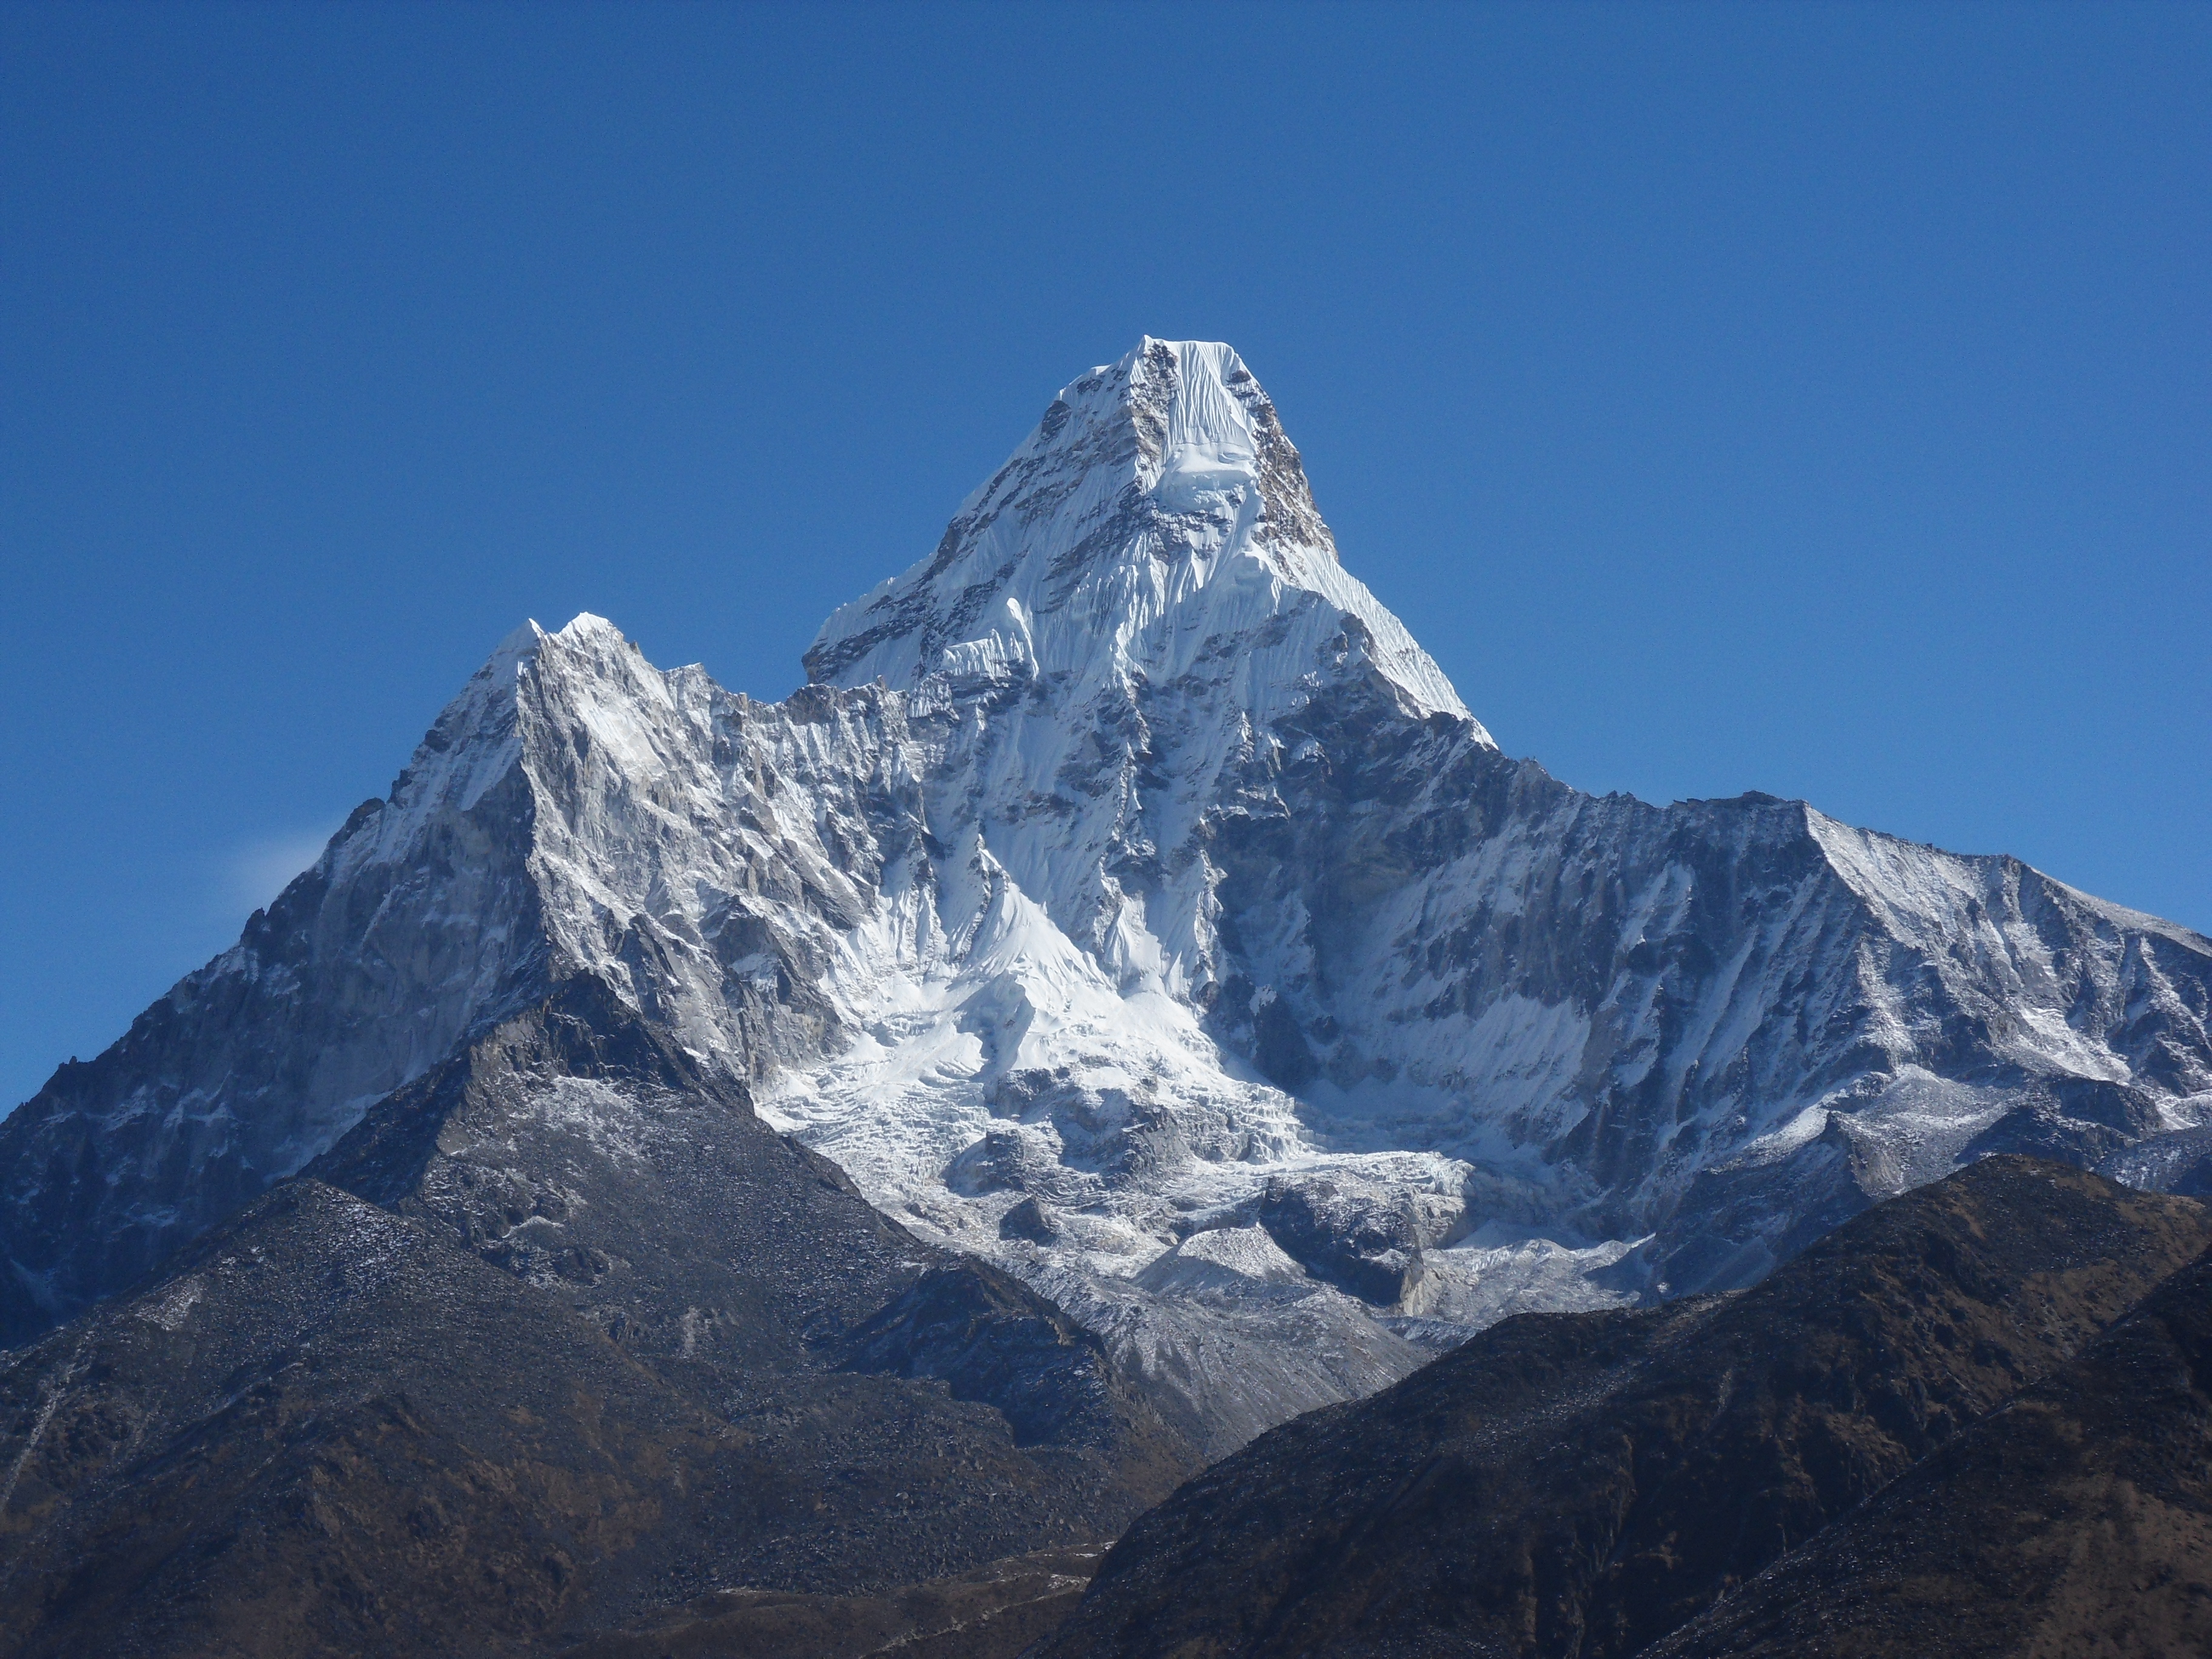 Ama Dablam from the southwest